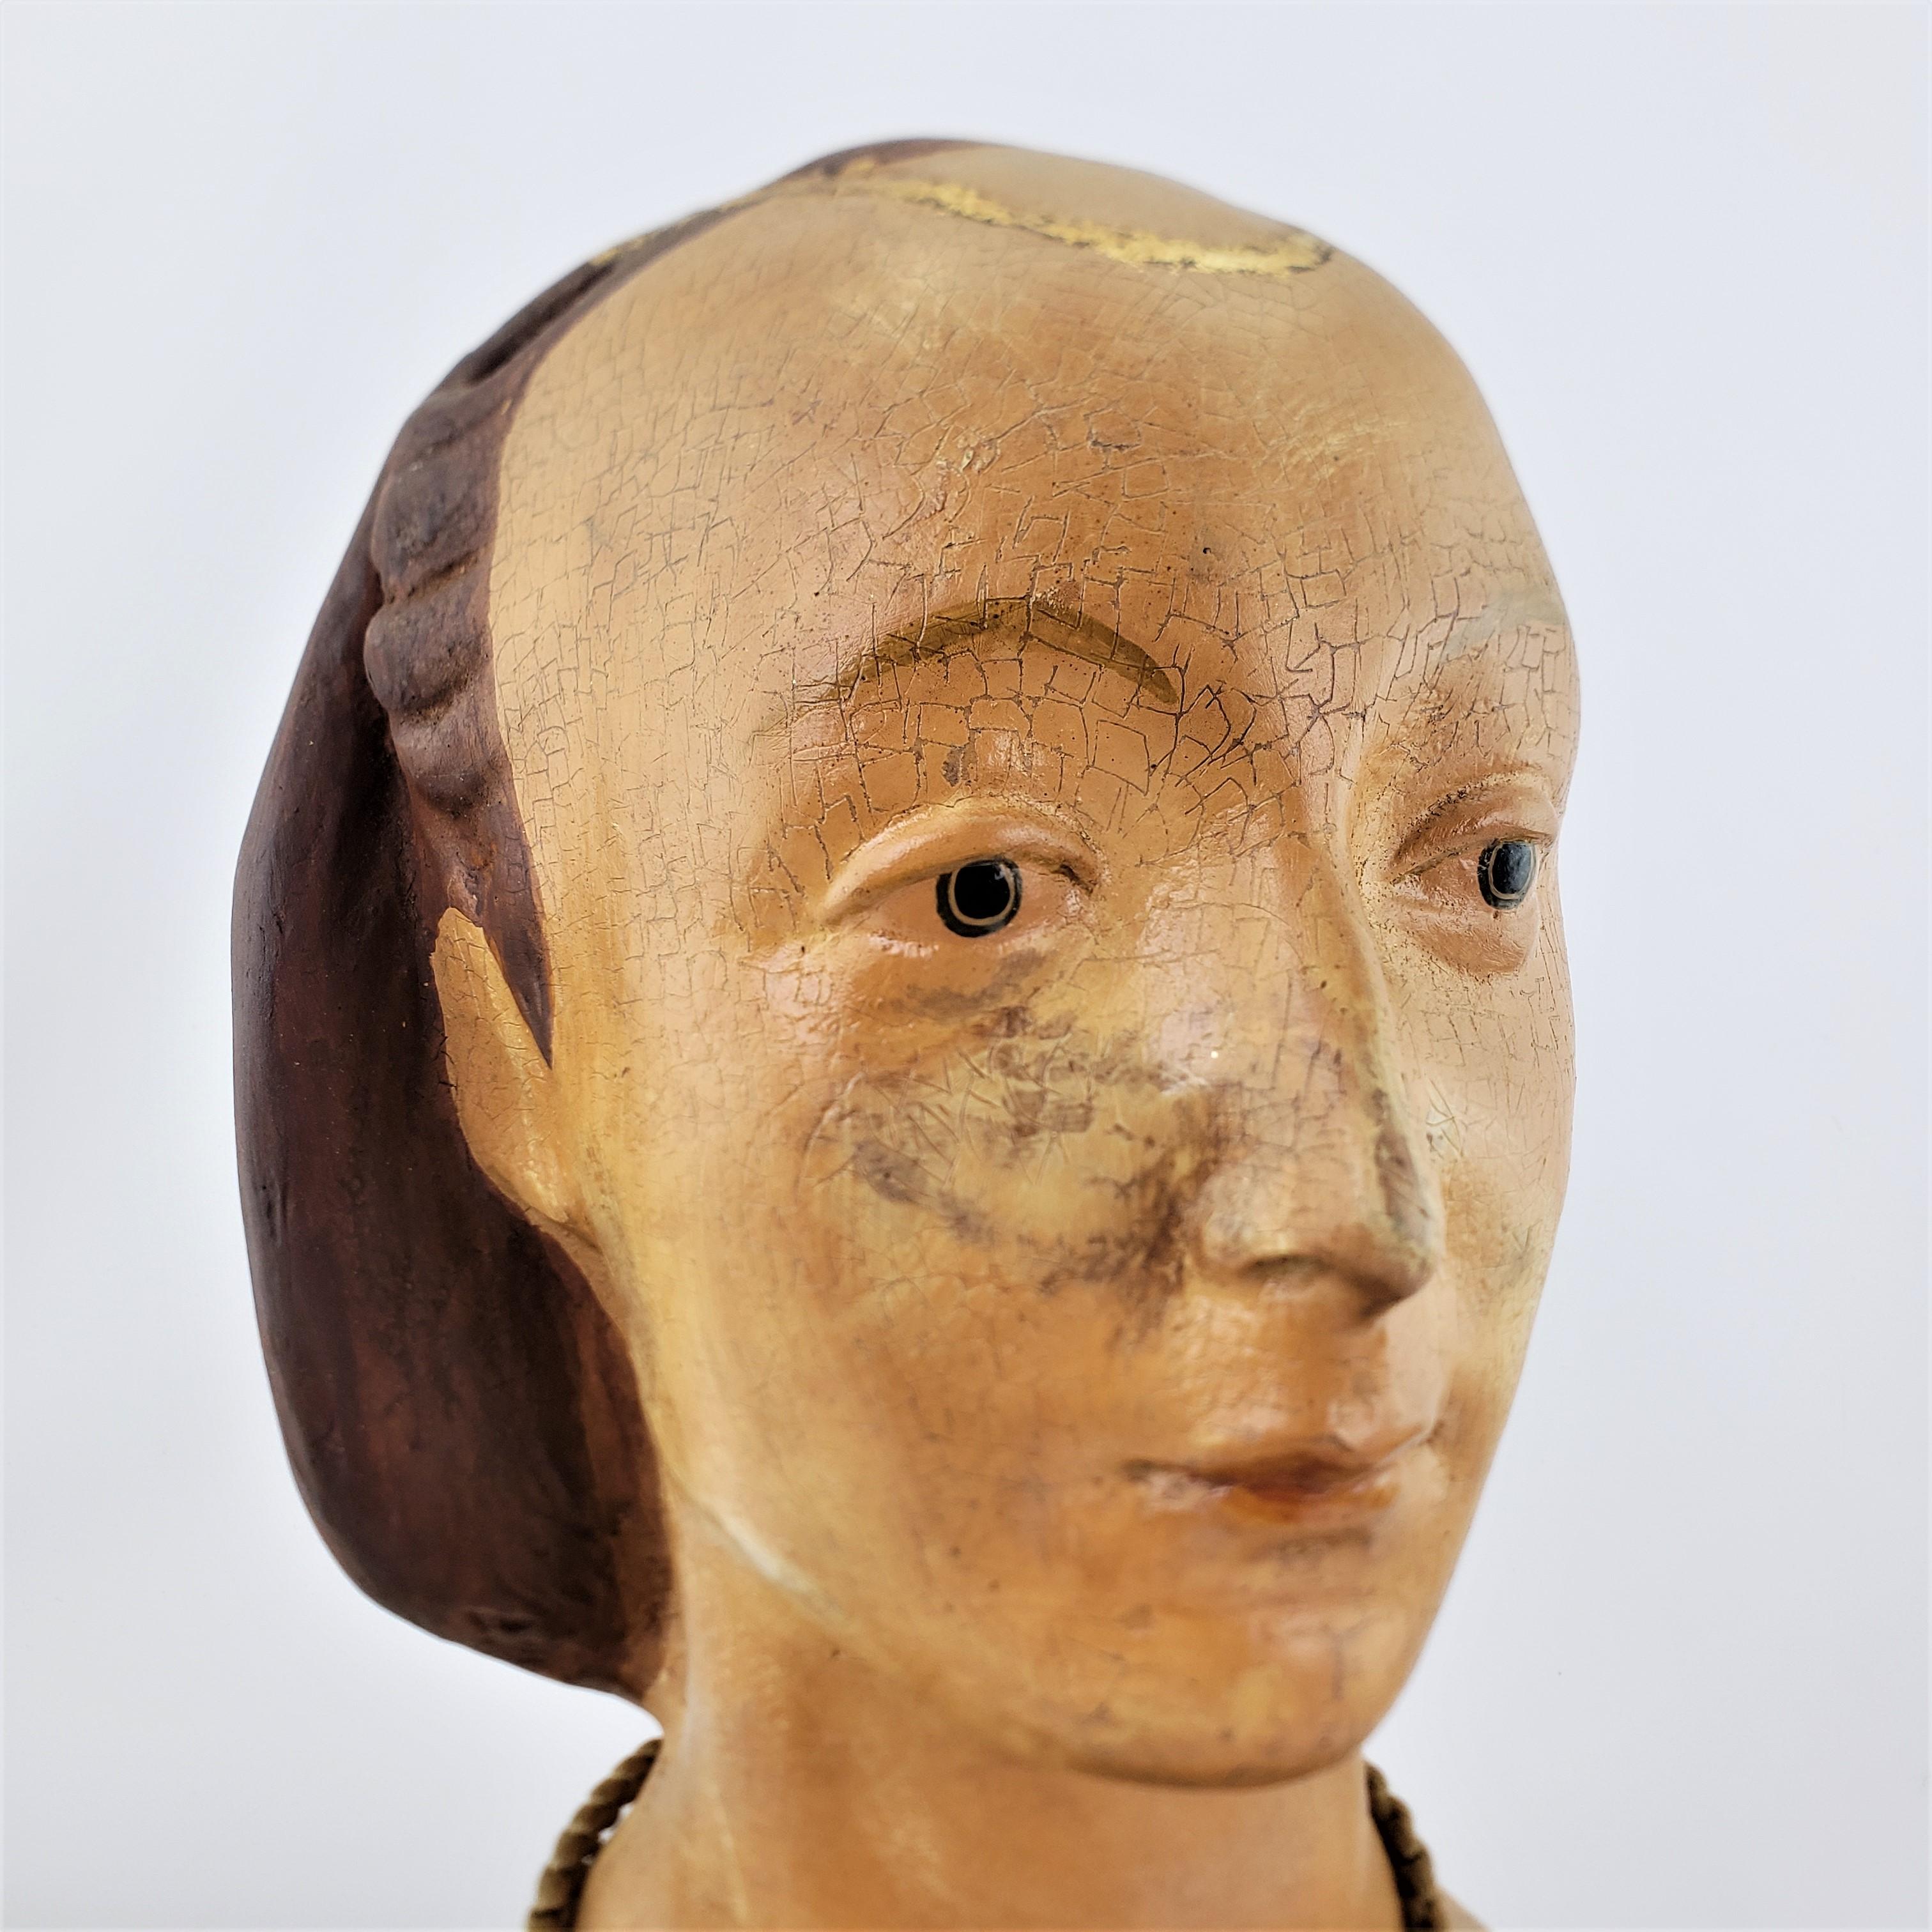 20th Century Antique Paper Mache Hand-Painted Bust or Sculpture of a Victorian Female